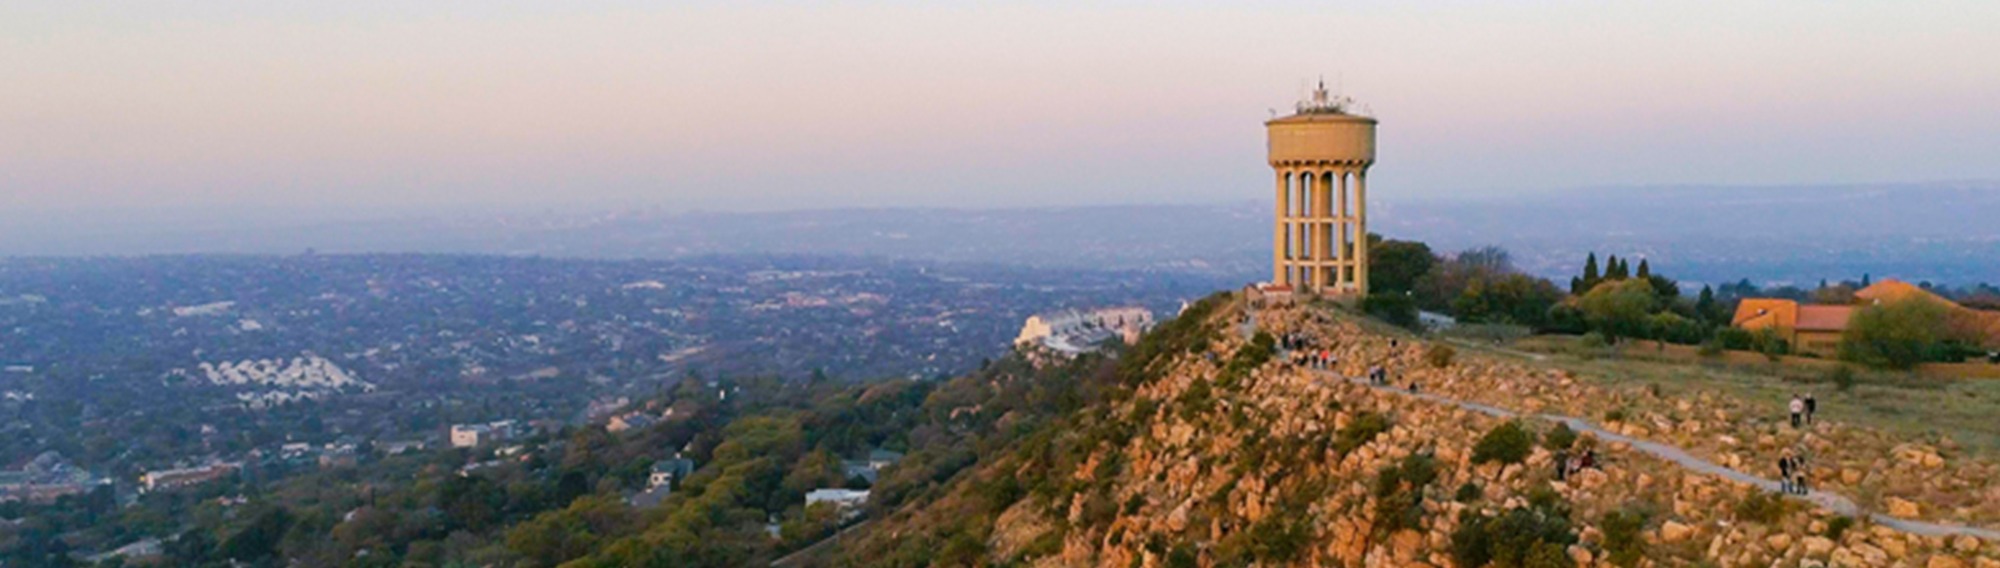 "Panoramic view of Randburg with its iconic water tower standing tall on a rocky outcrop at dusk.